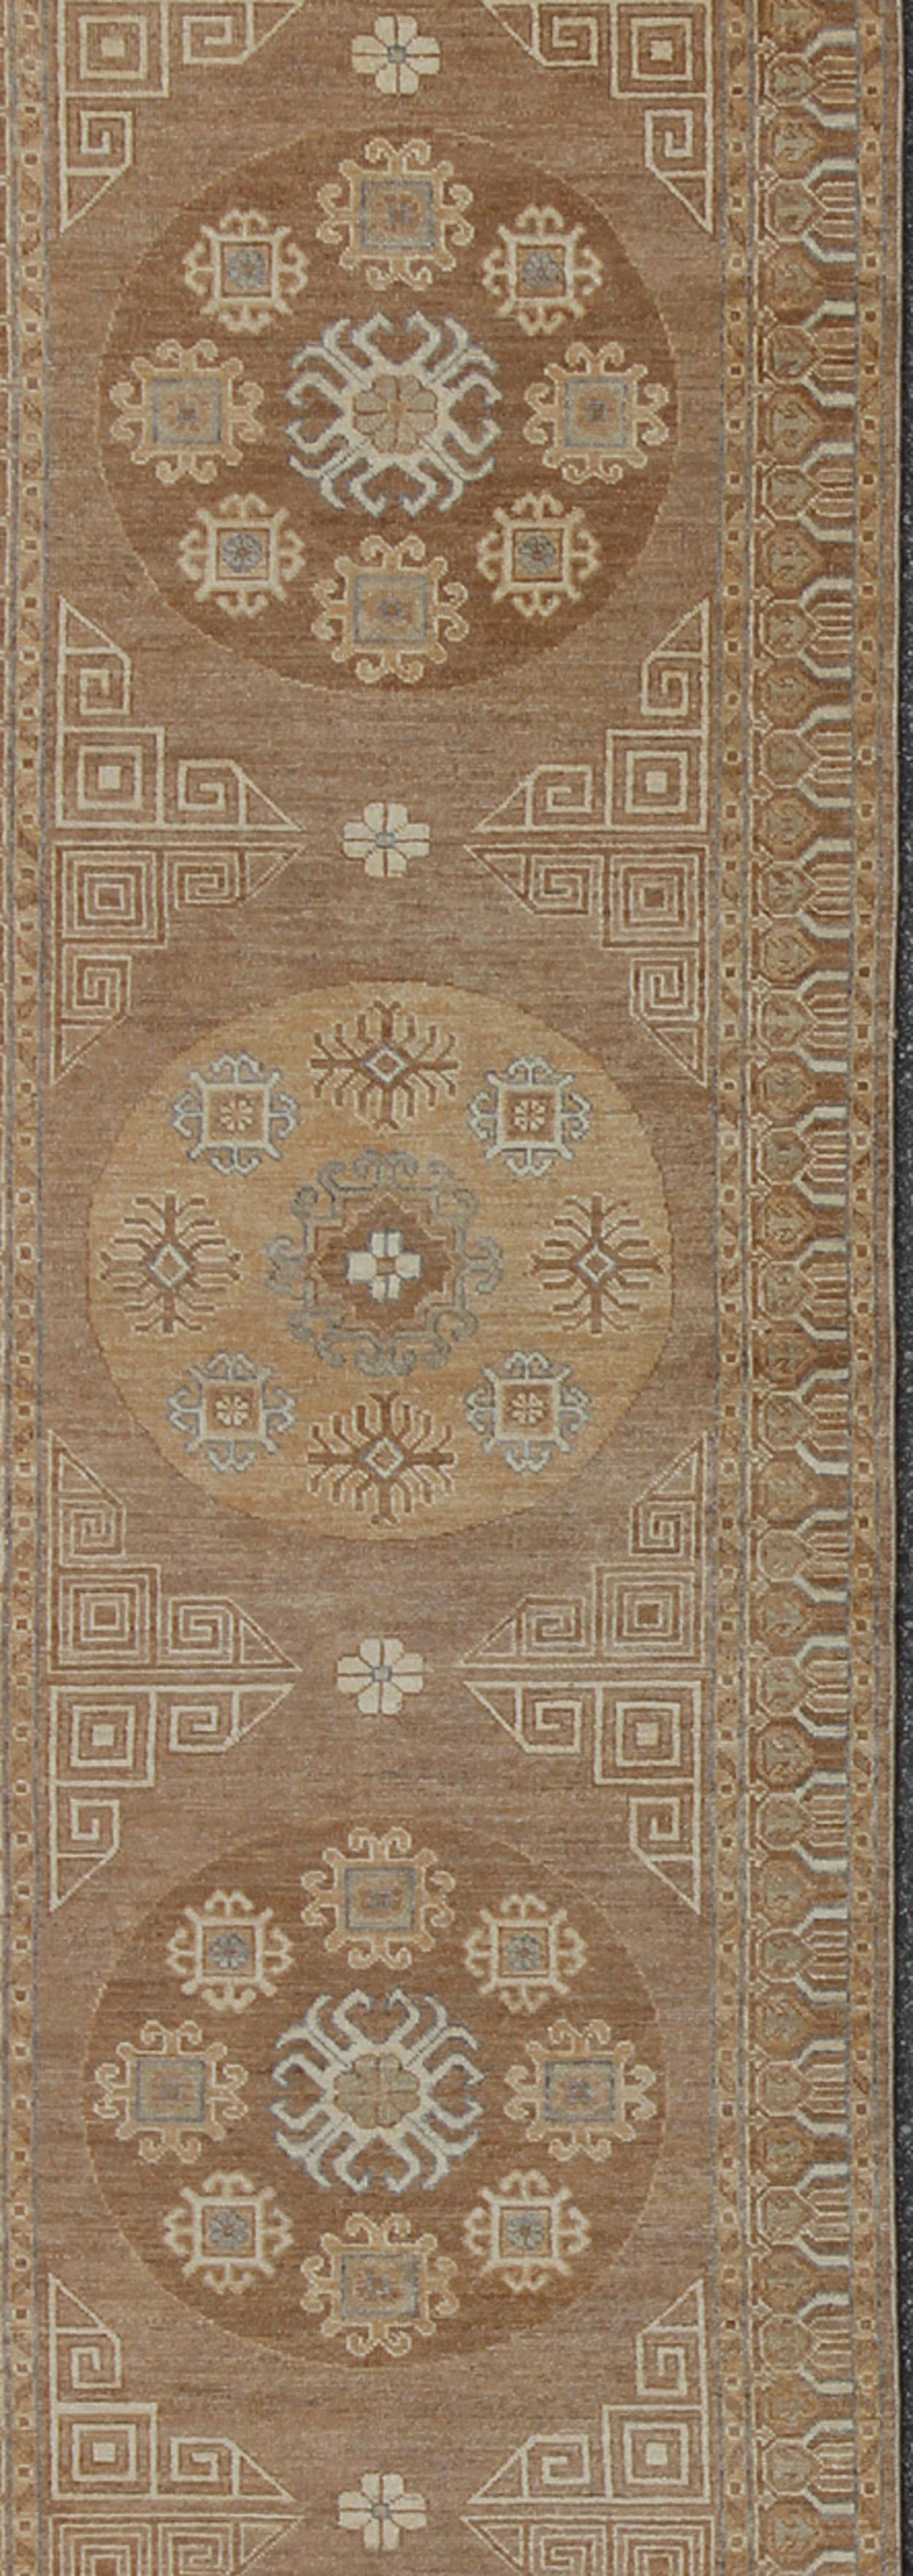 Light Khotan runner with geometric Medallions, rug/MP-1703-1743 country of origin / type: Afghanistan / Khotan

This Khotan features a geometric all-over circle design flanked by a repeating pattern in the border. The entirety of the piece is